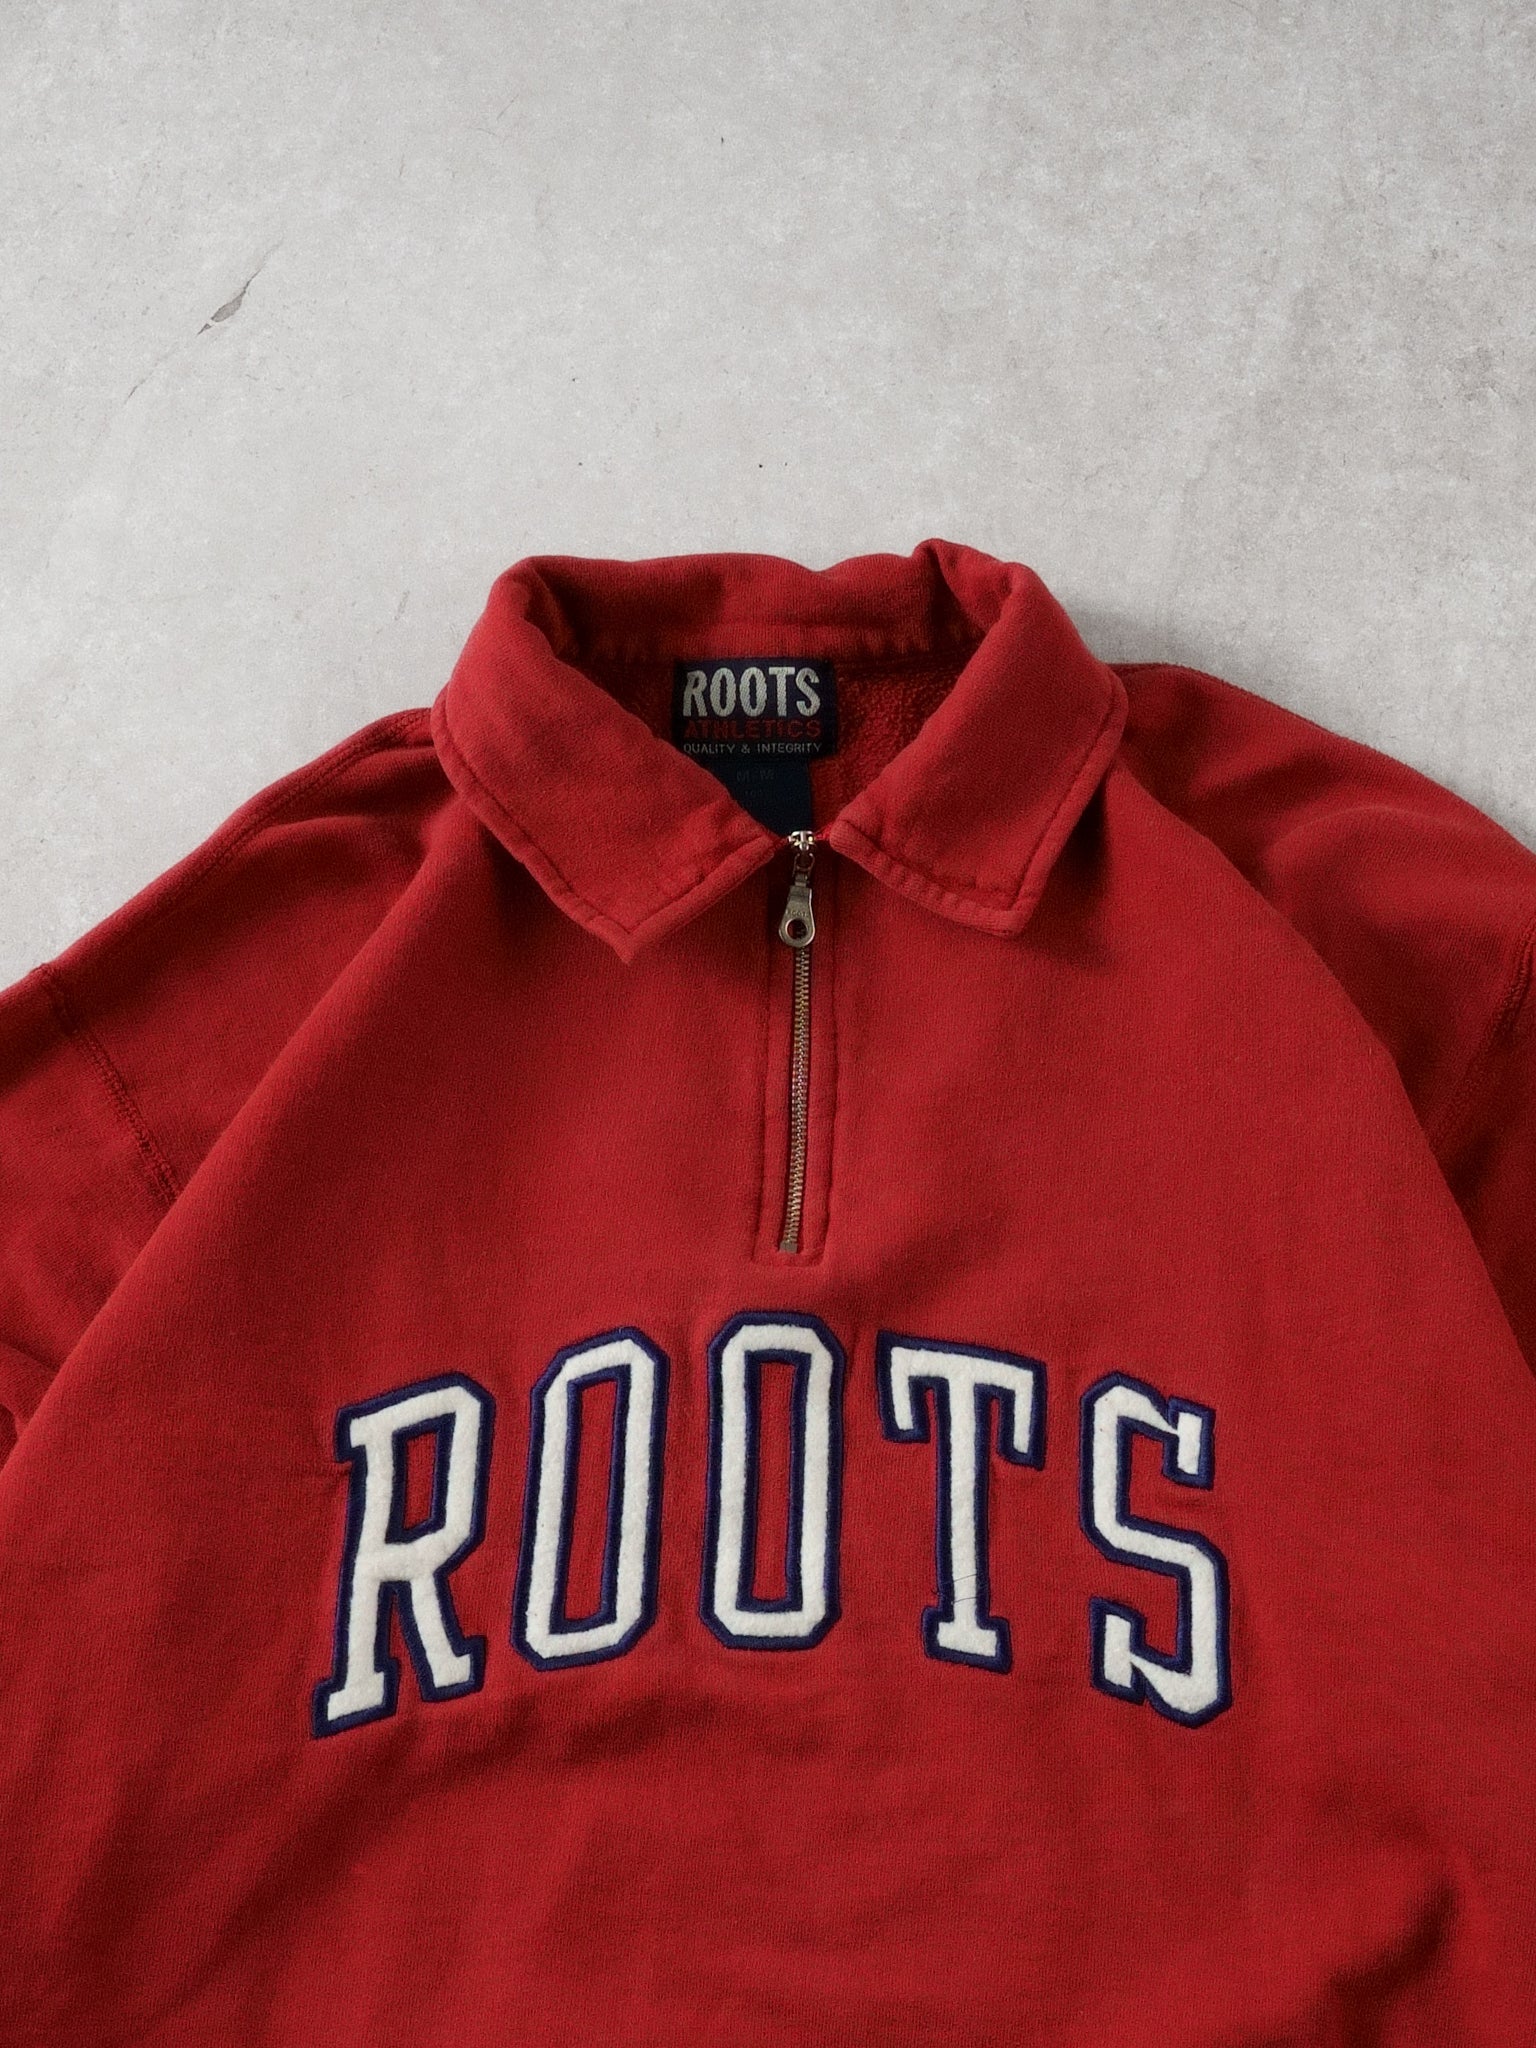 Vintage 90s Washed Red Roots Collared 1/4 Zipup (L)